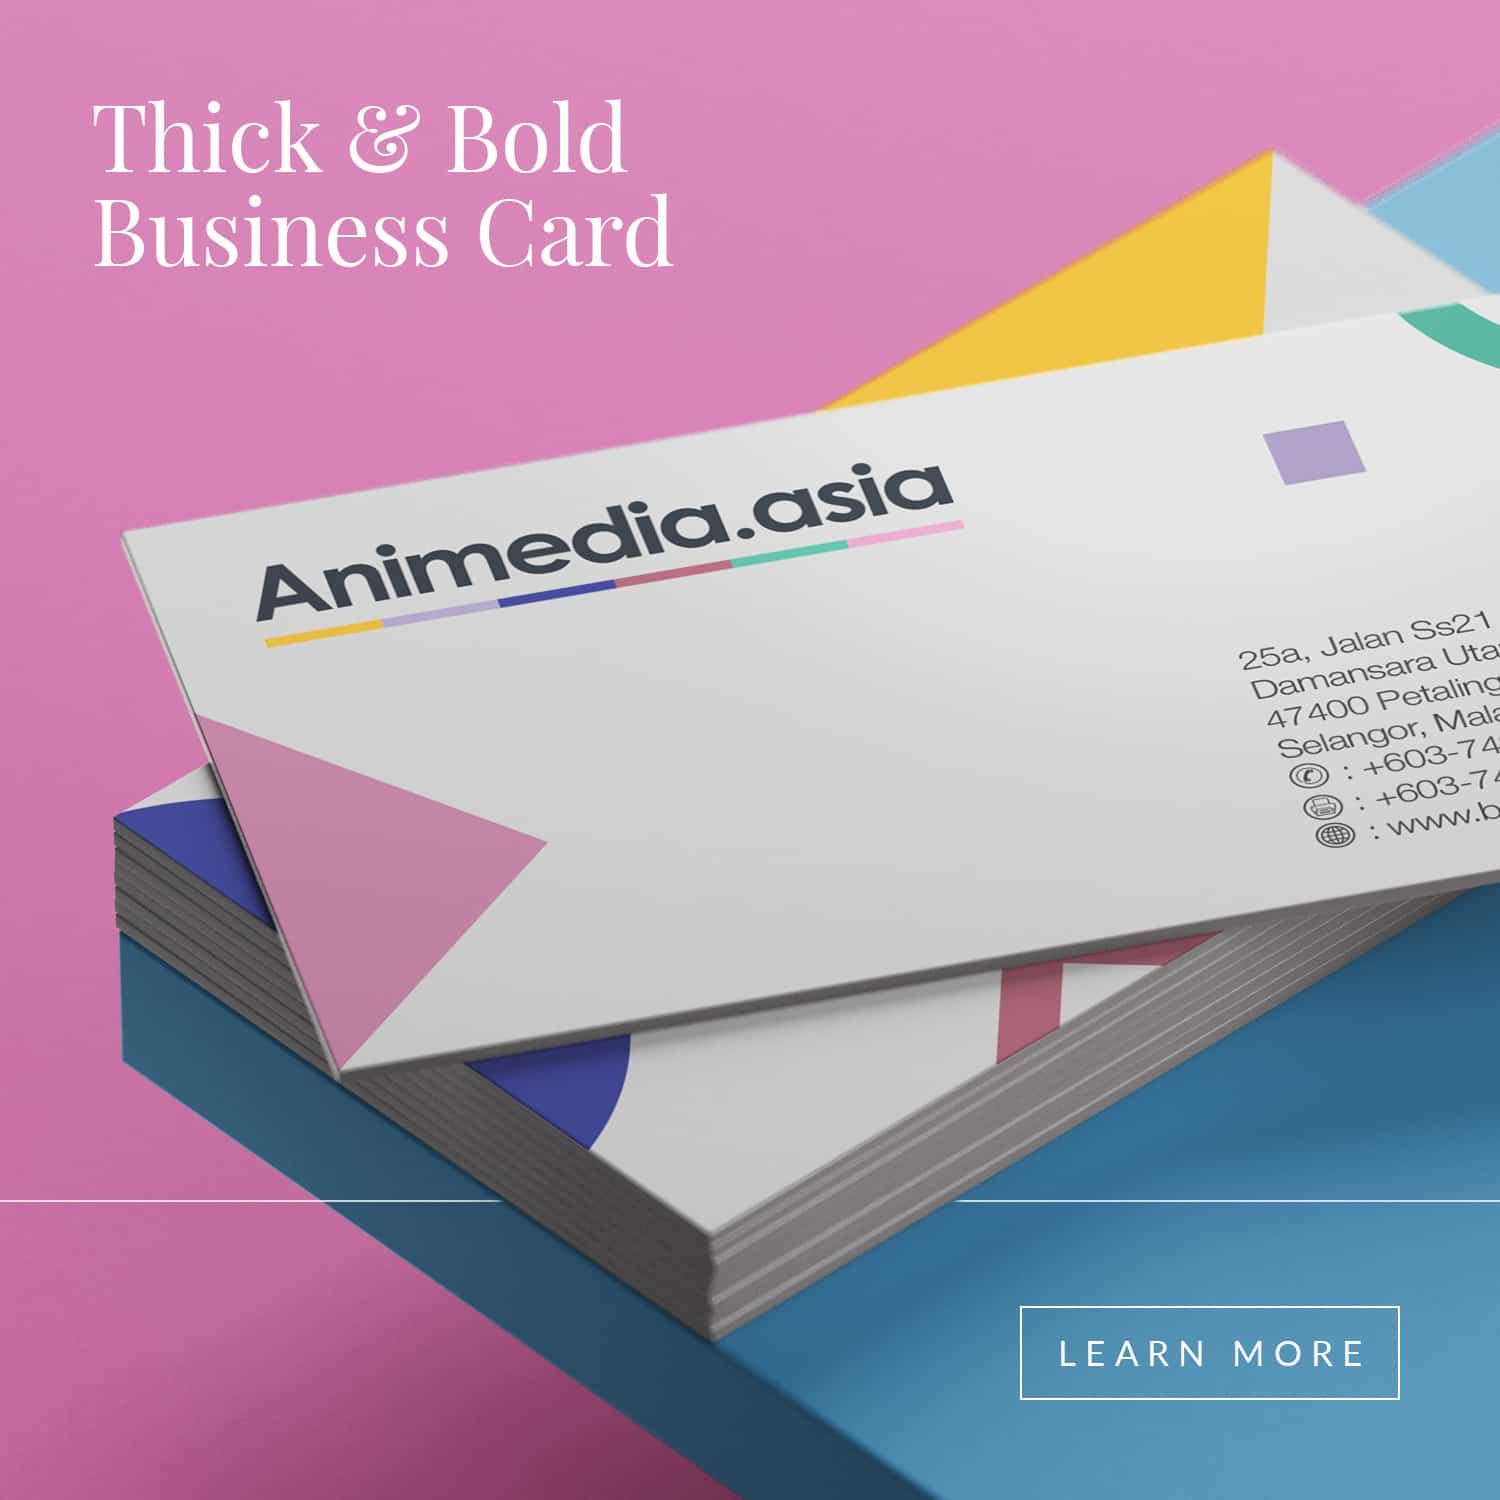 Thick & Bold Business Card Printing